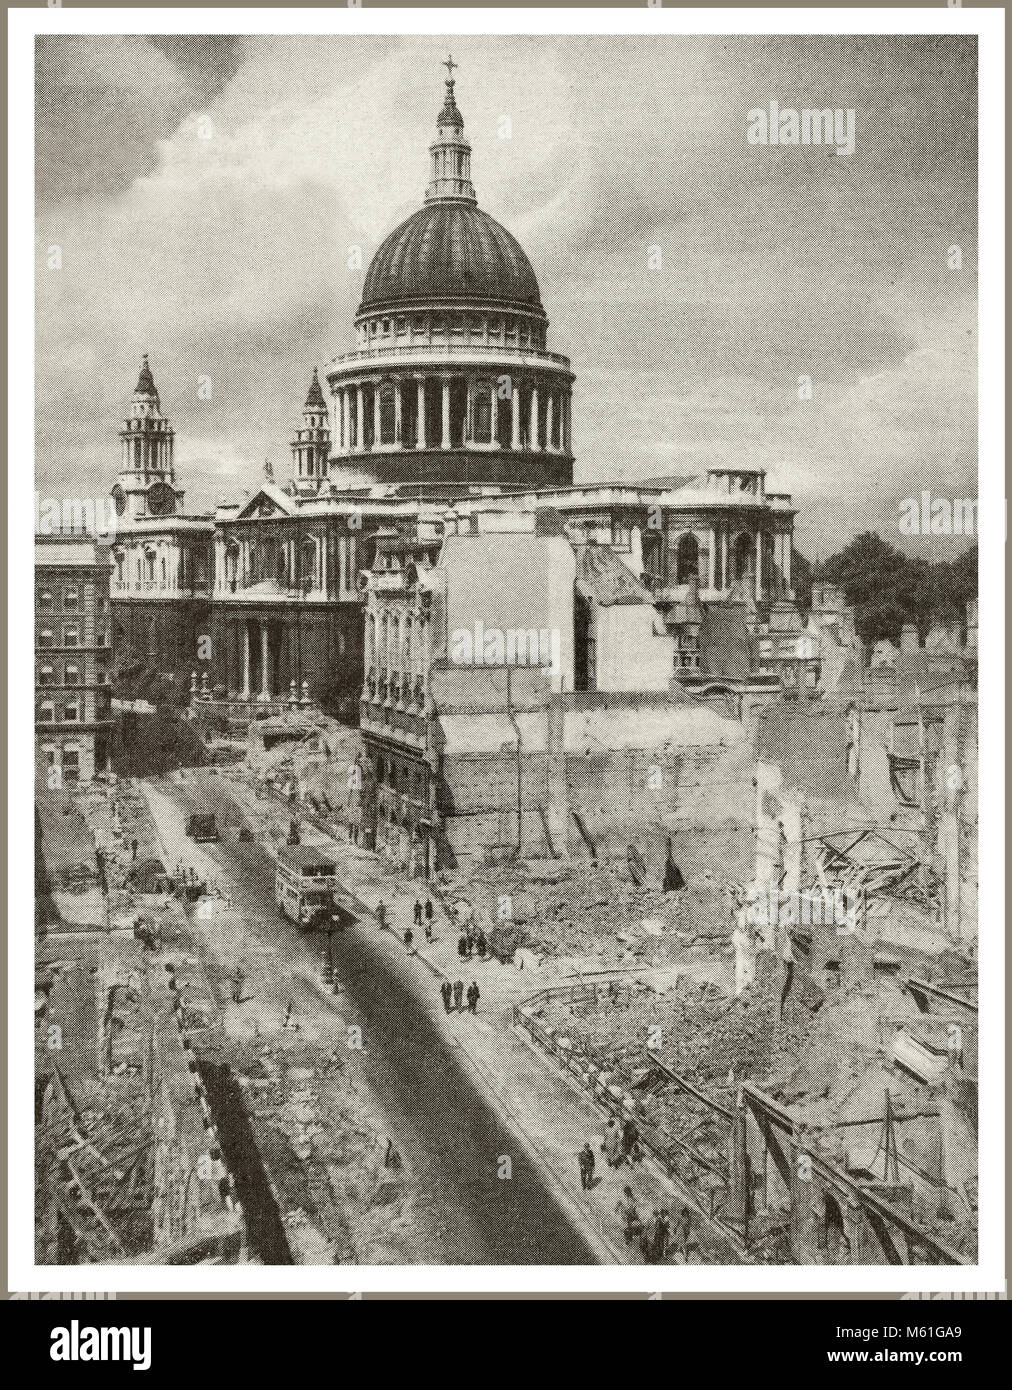 WW2 Saint Pauls Cathedral London Blitz surrounded by bombed out buildings in close proximity, after the Nazi Luftwaffe Blitz of 29th/30th December 1940 where St. Pauls Cathedral emerged remarkably unscathed and subsequently became a symbol of resistance during the World War II Second World War London Blitz bombings Stock Photo